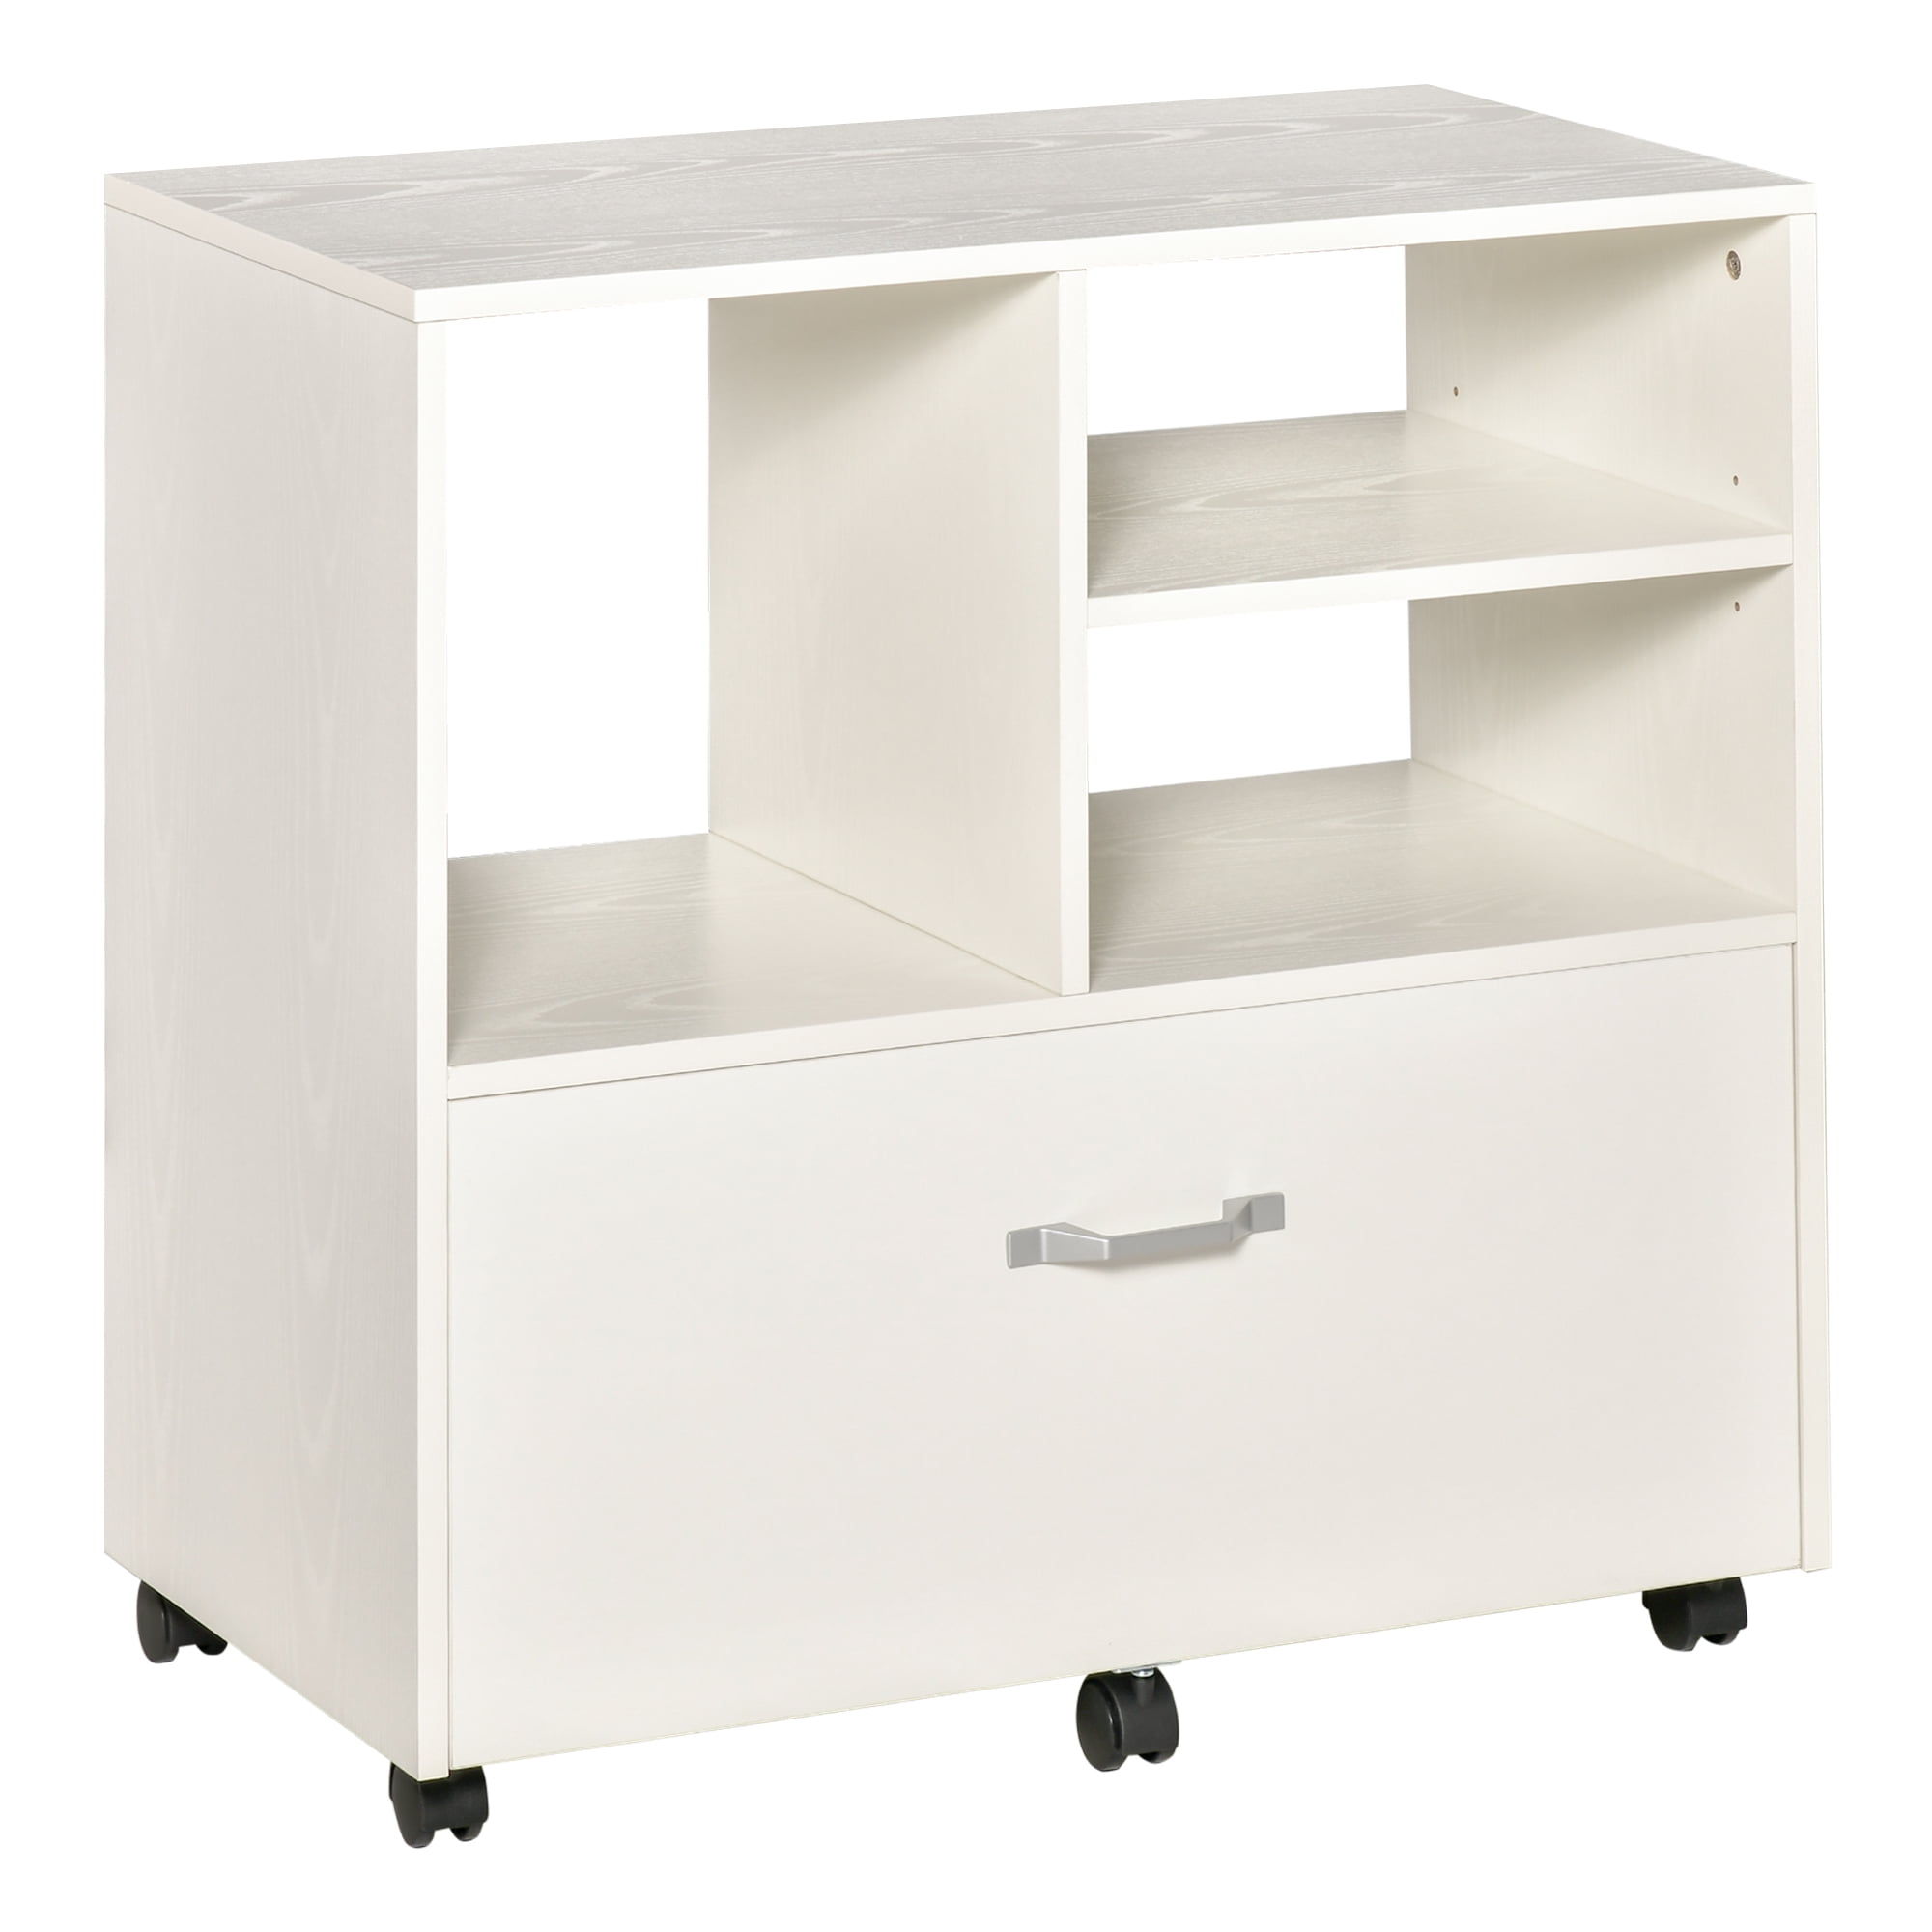 Details about   YITAHOME File Cabinet 2-Drawer Shelf Filing Storage Organizer Home Office White 